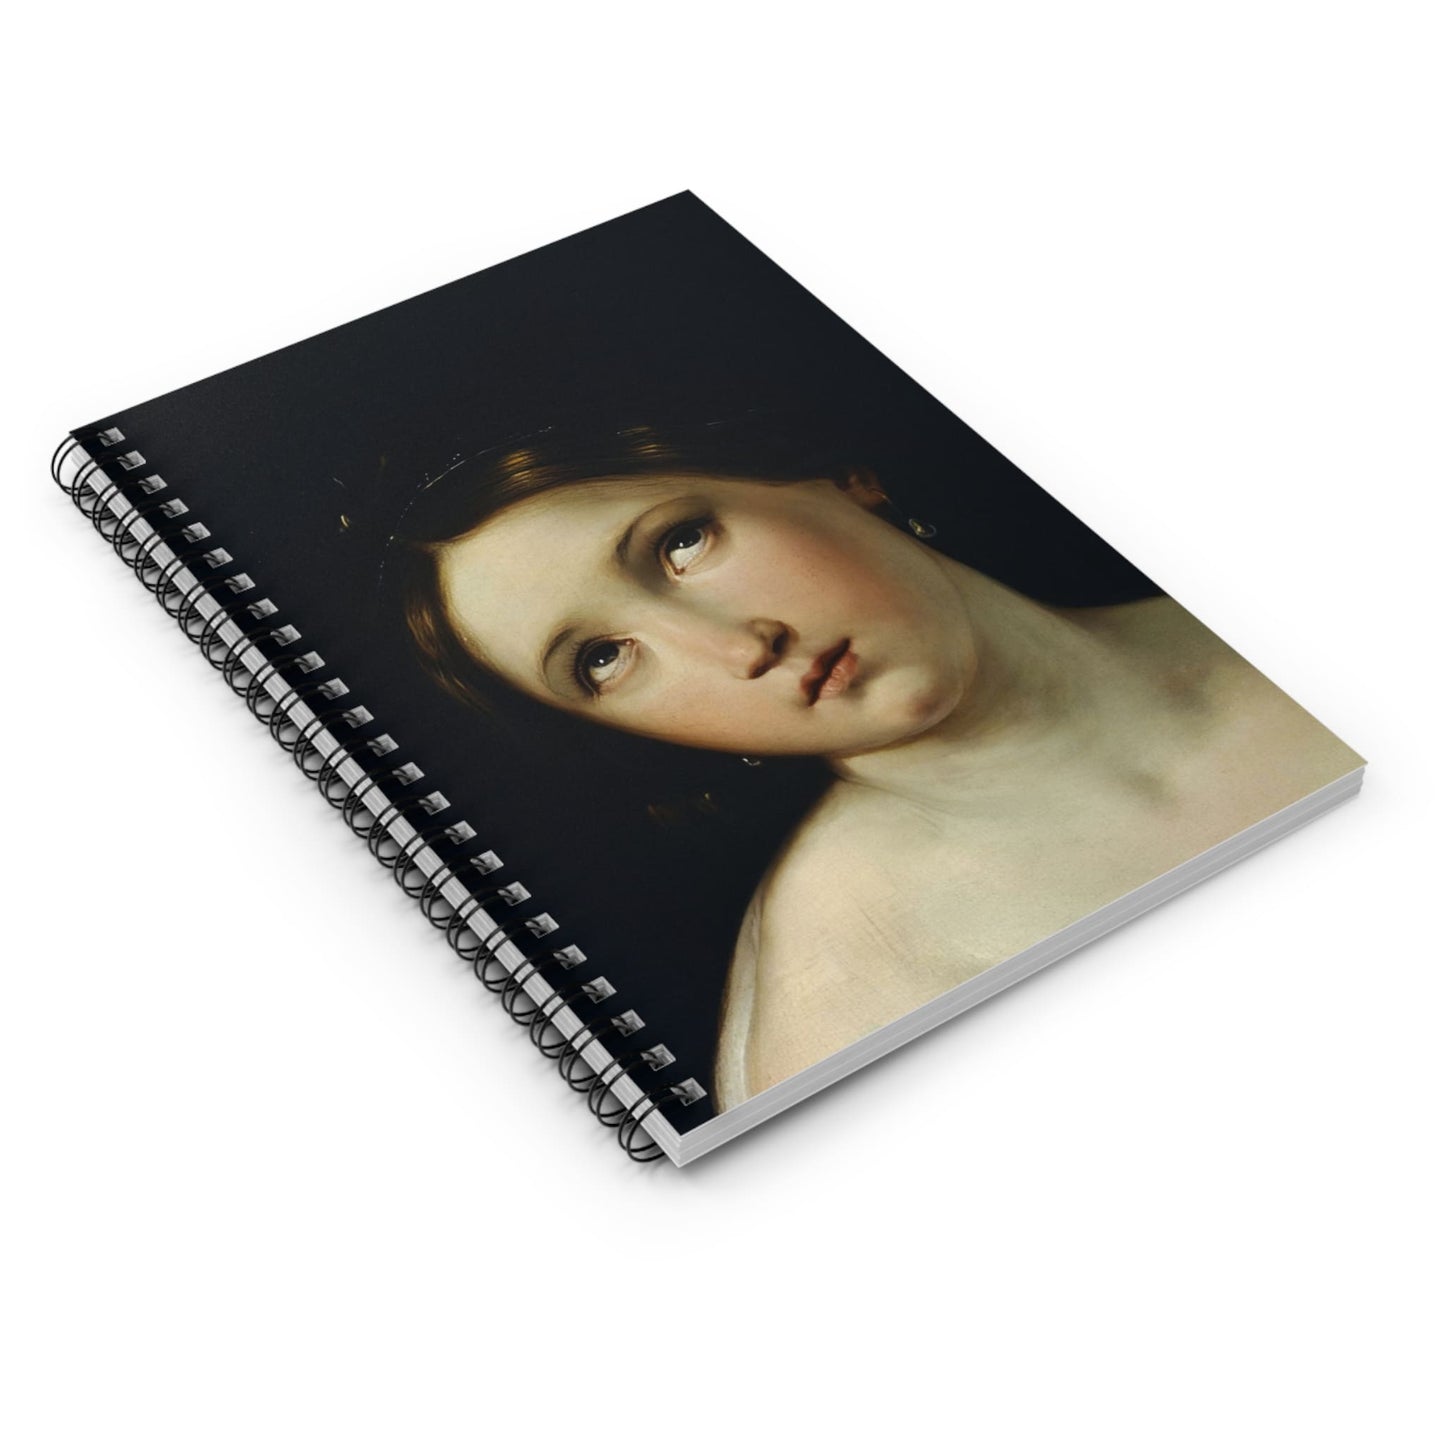 Dark Academia Spiral Notebook Laying Flat on White Surface